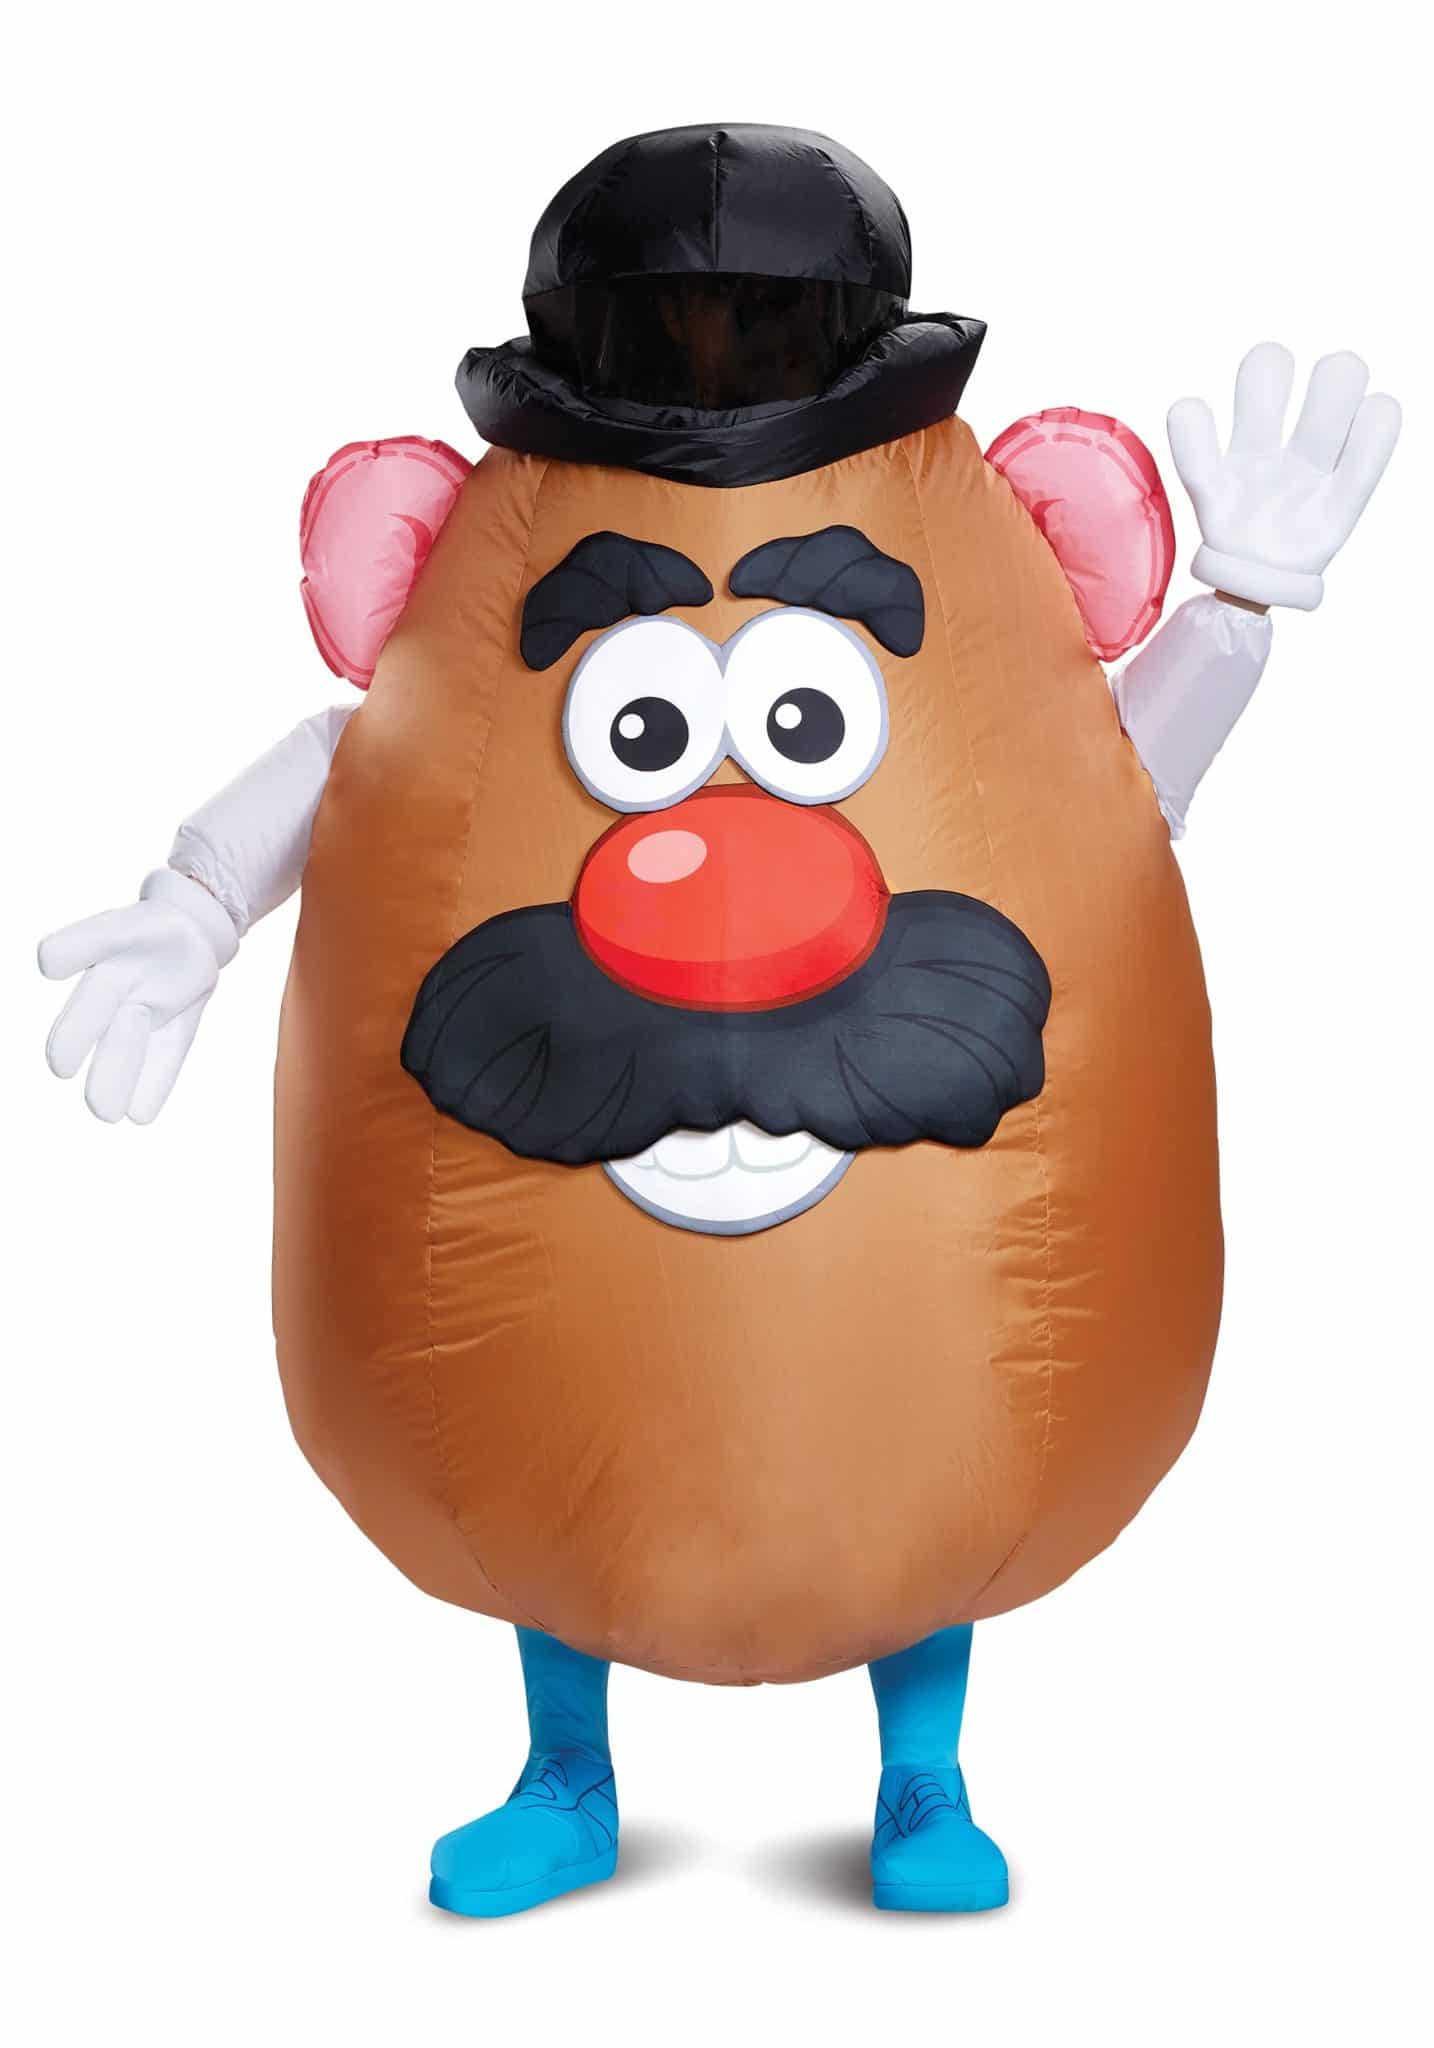 Toy Story 4 Halloween Costumes 2023: Inflatable Mr. Potato Head